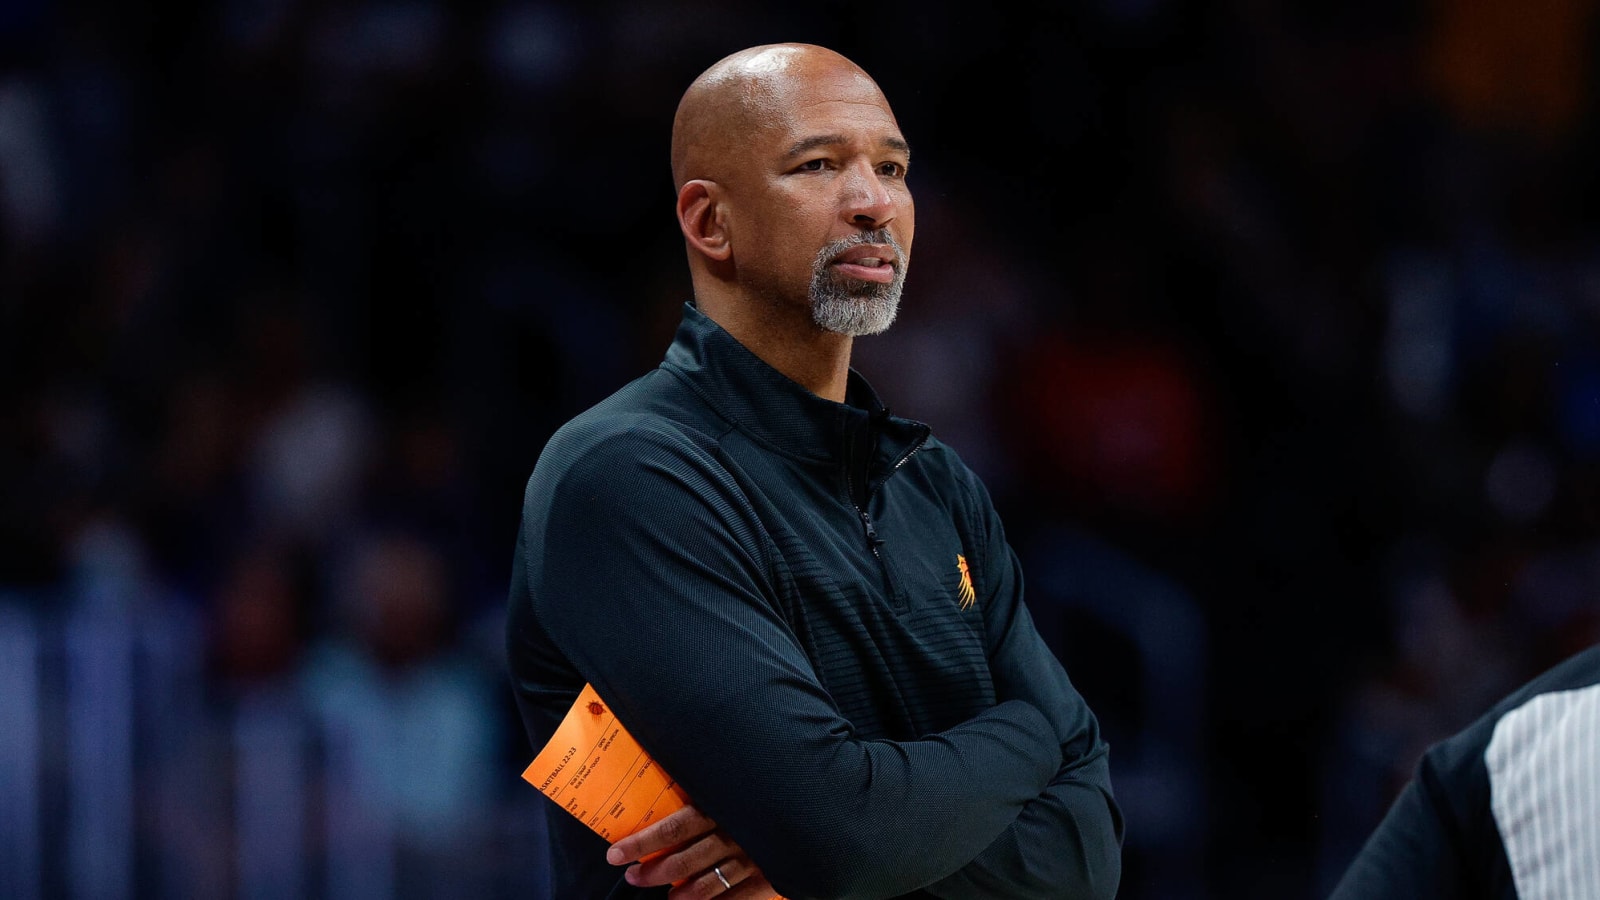 Report: Coaching candidate 'gaining steam' with Bucks